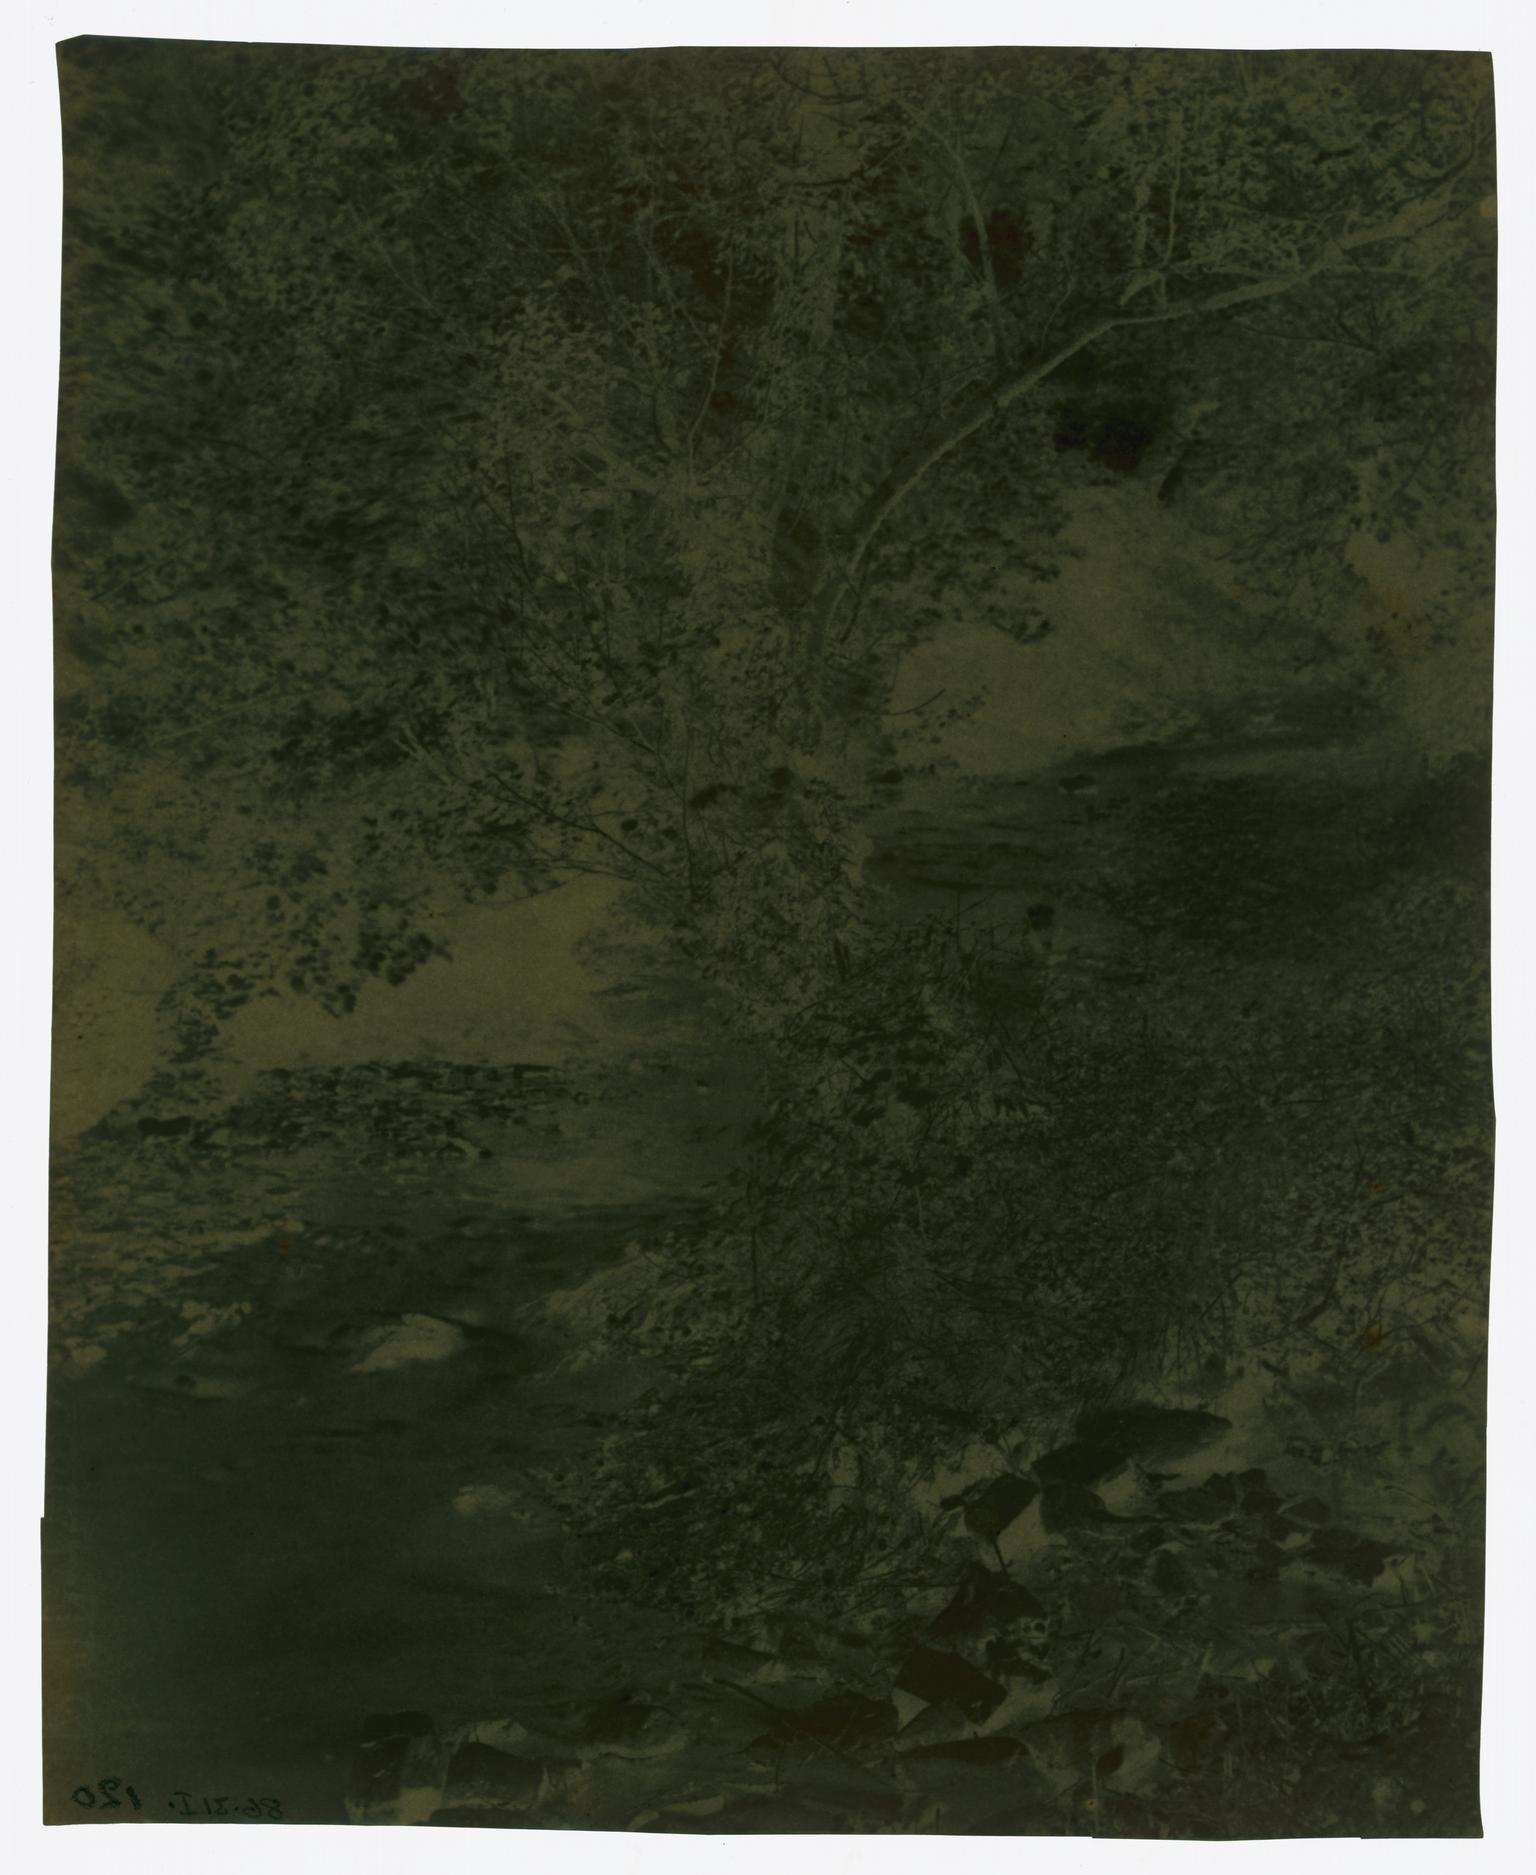 River running through wooded valley, negative